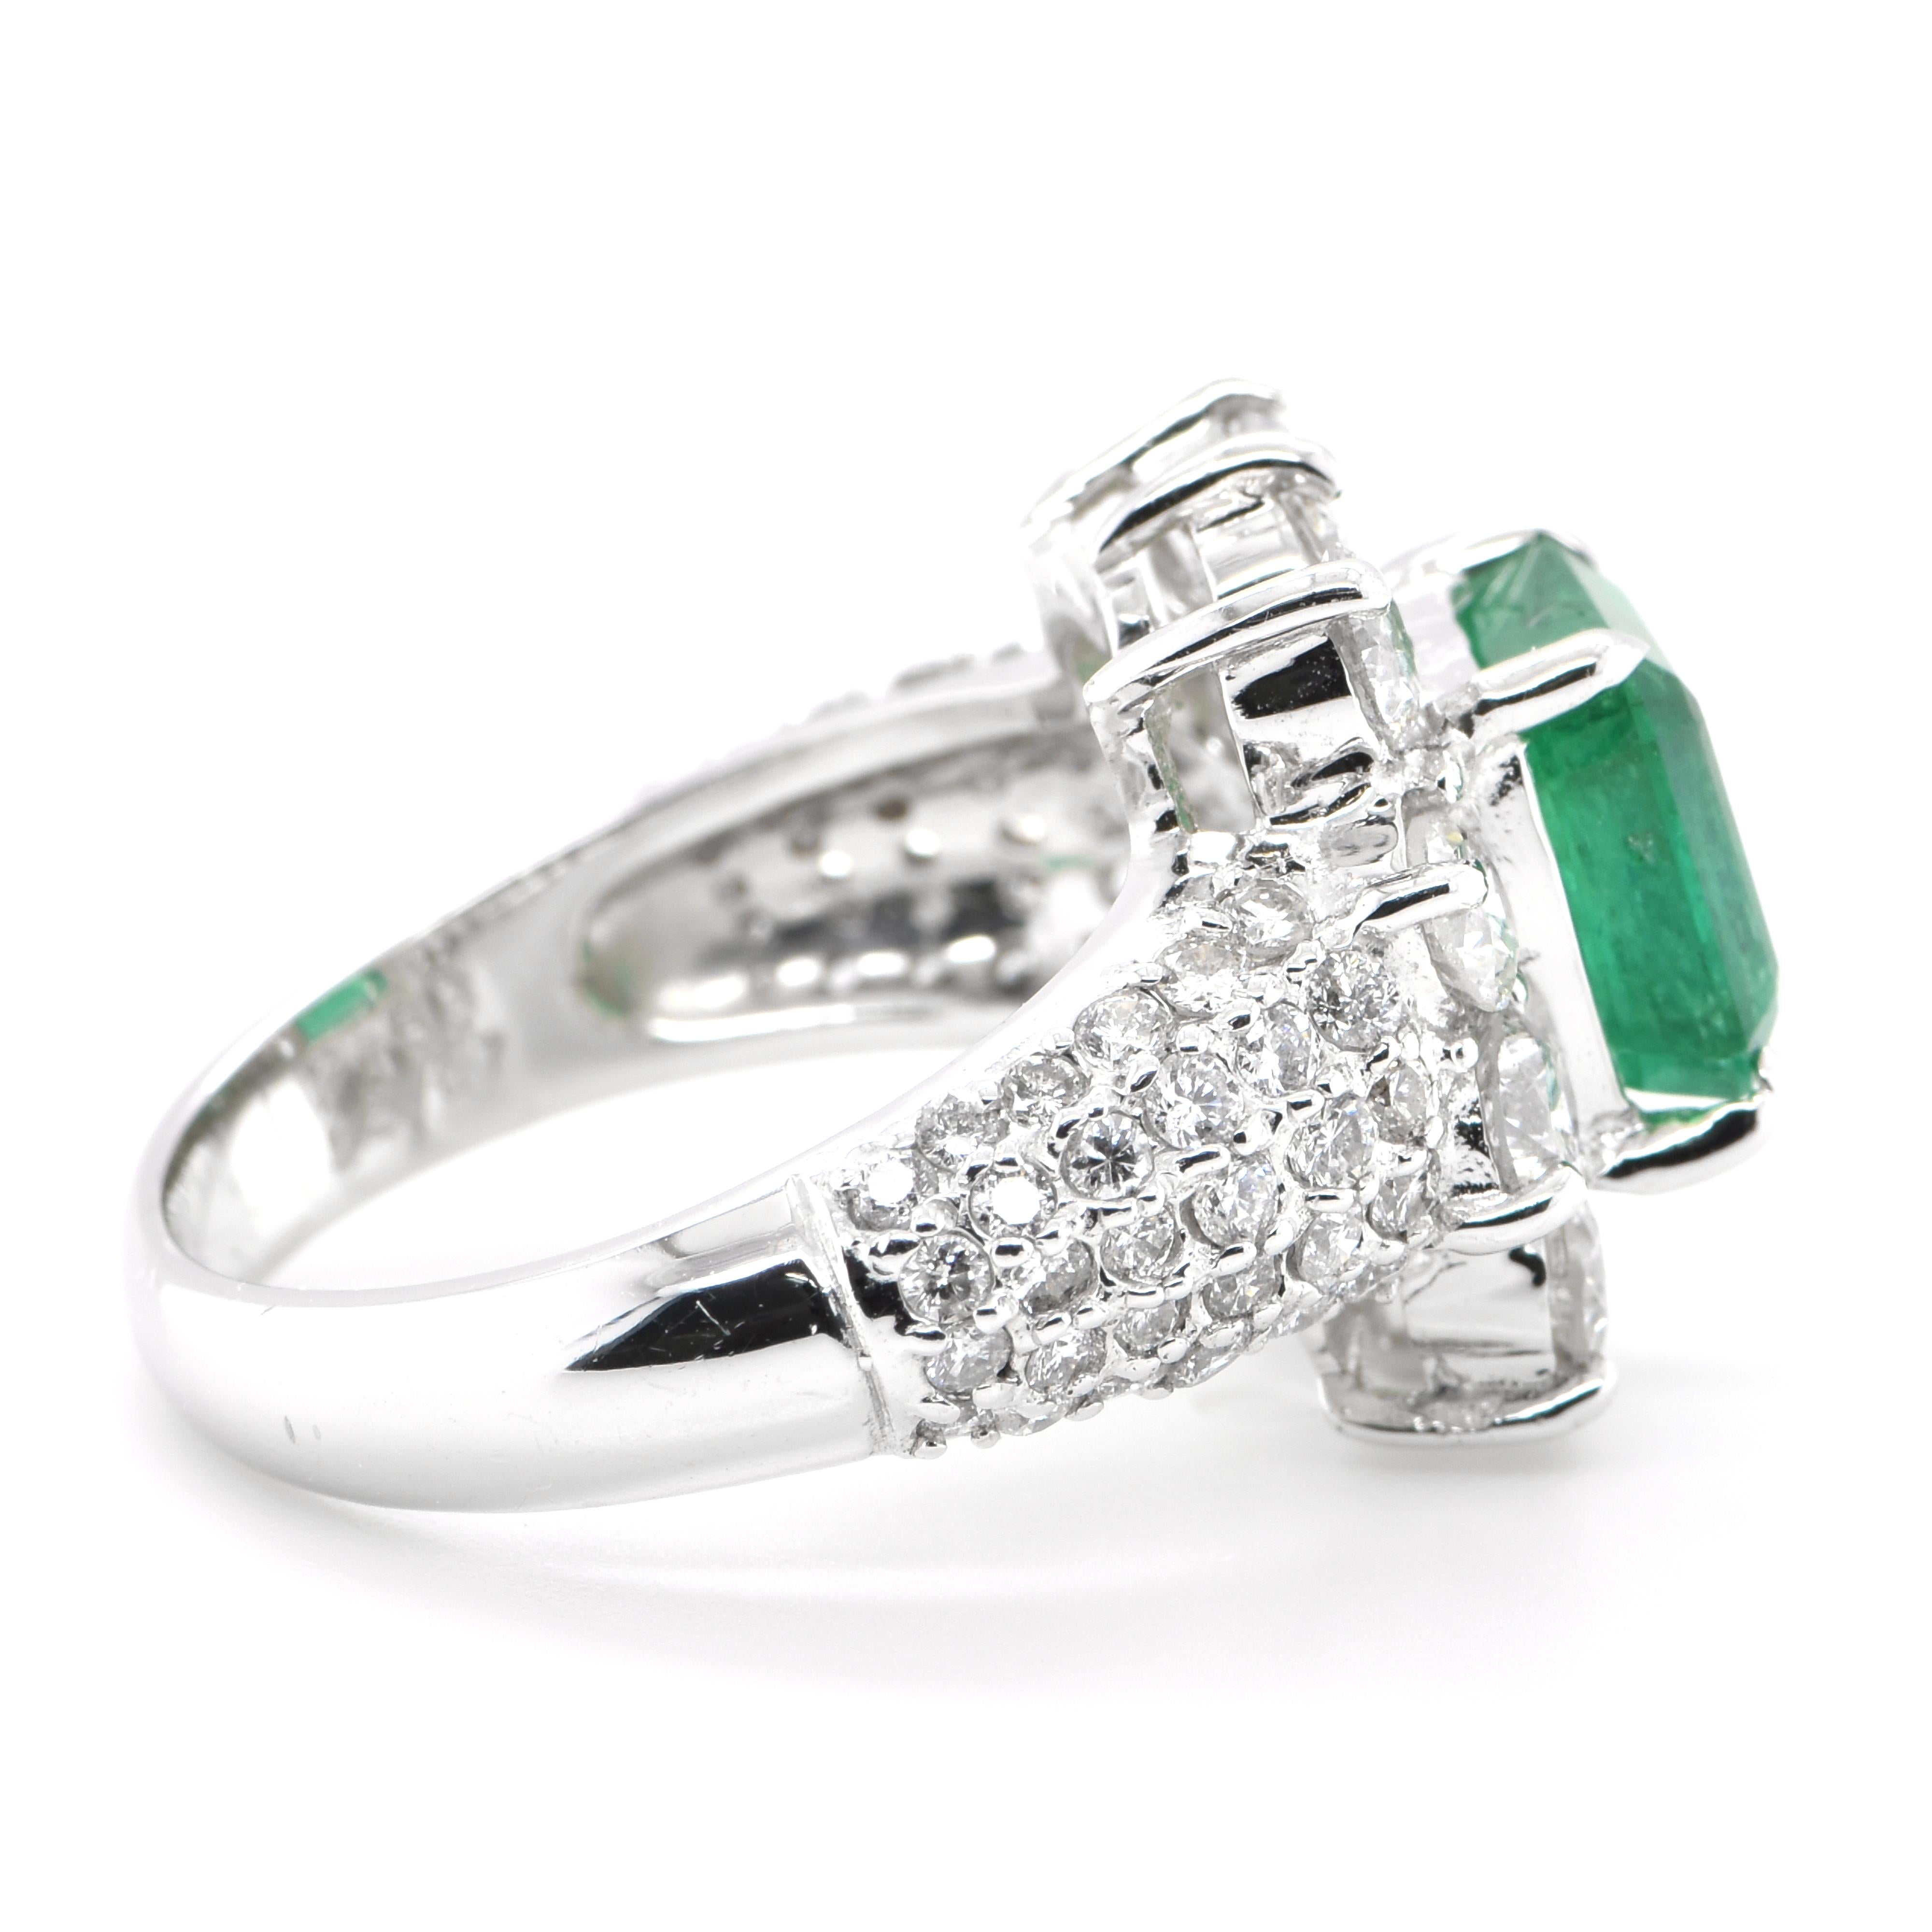 2.63 Carat Natural Emerald and Diamond Cocktail Ring Set in Platinum In New Condition For Sale In Tokyo, JP